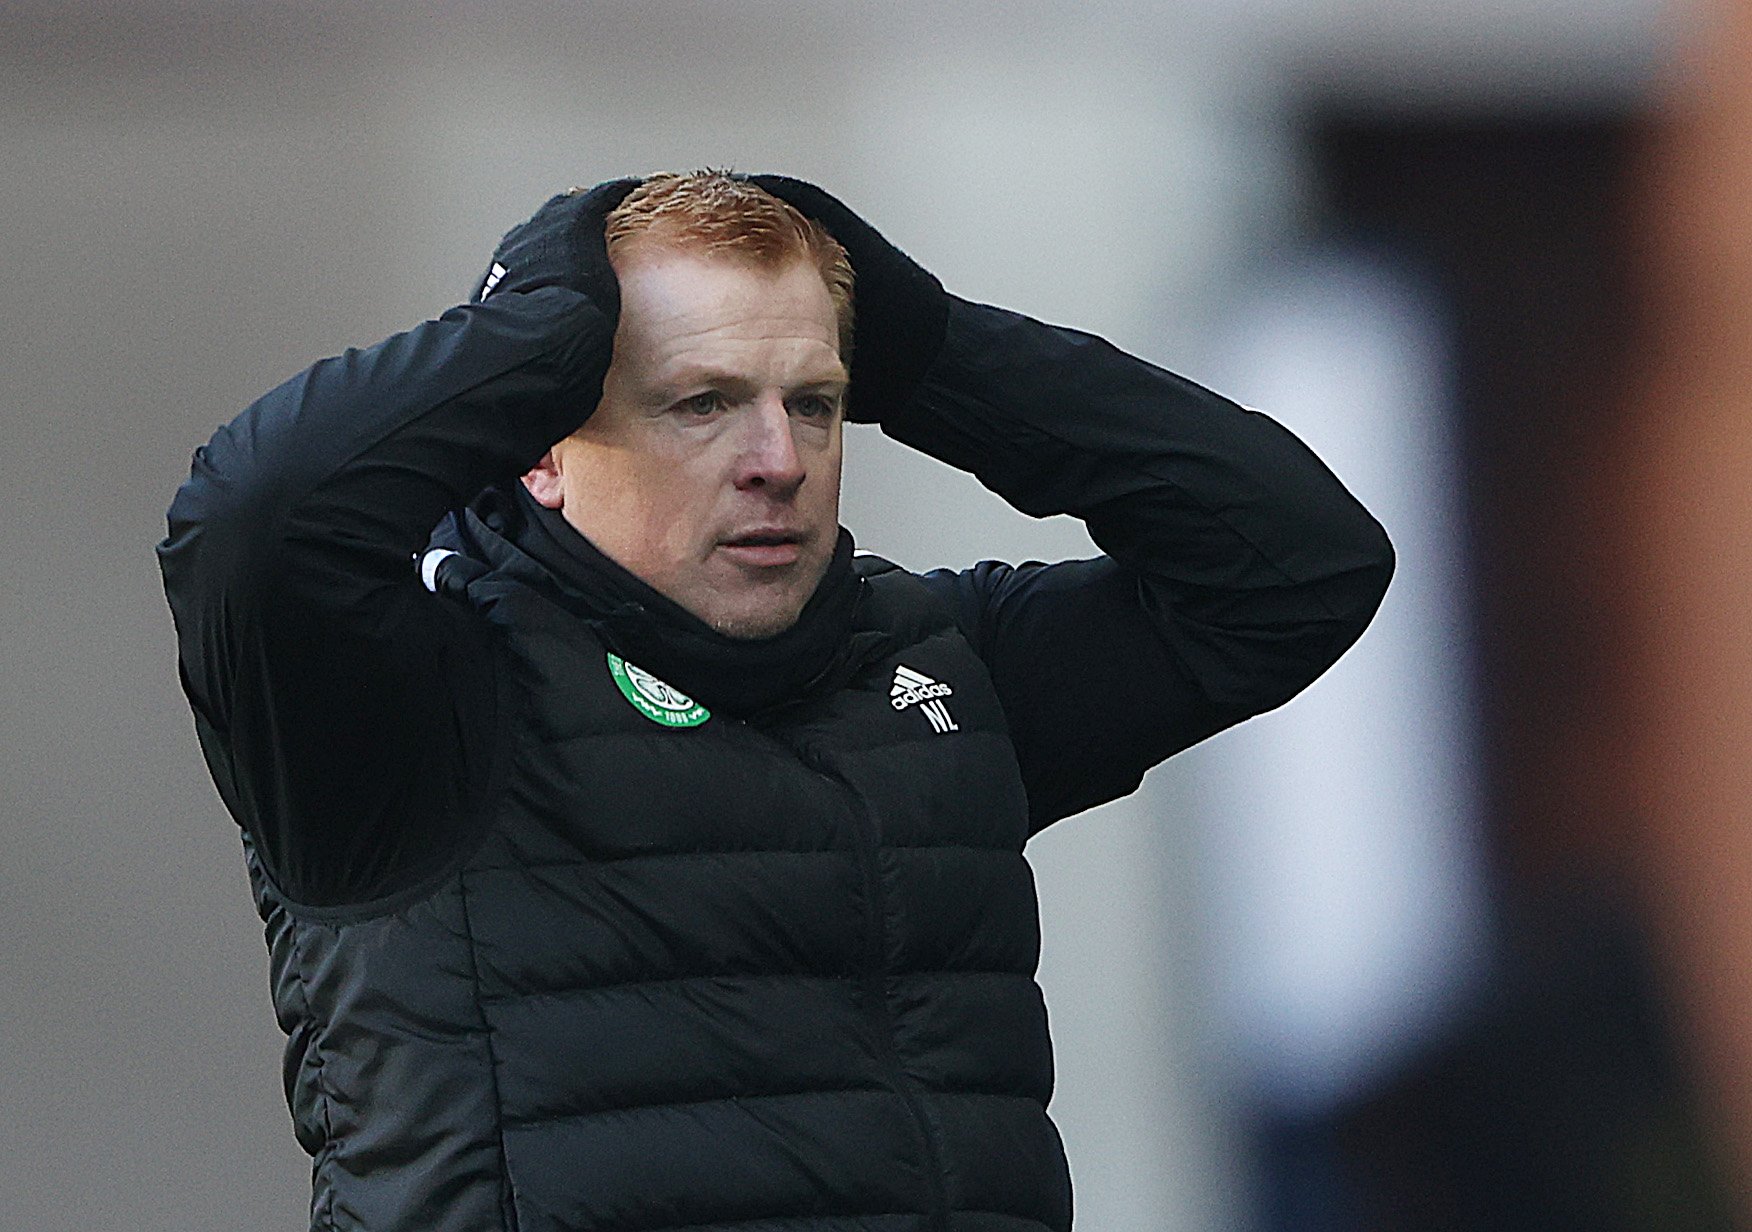 If Celtic boss Neil Lennon stays, here are 3 changes he must make